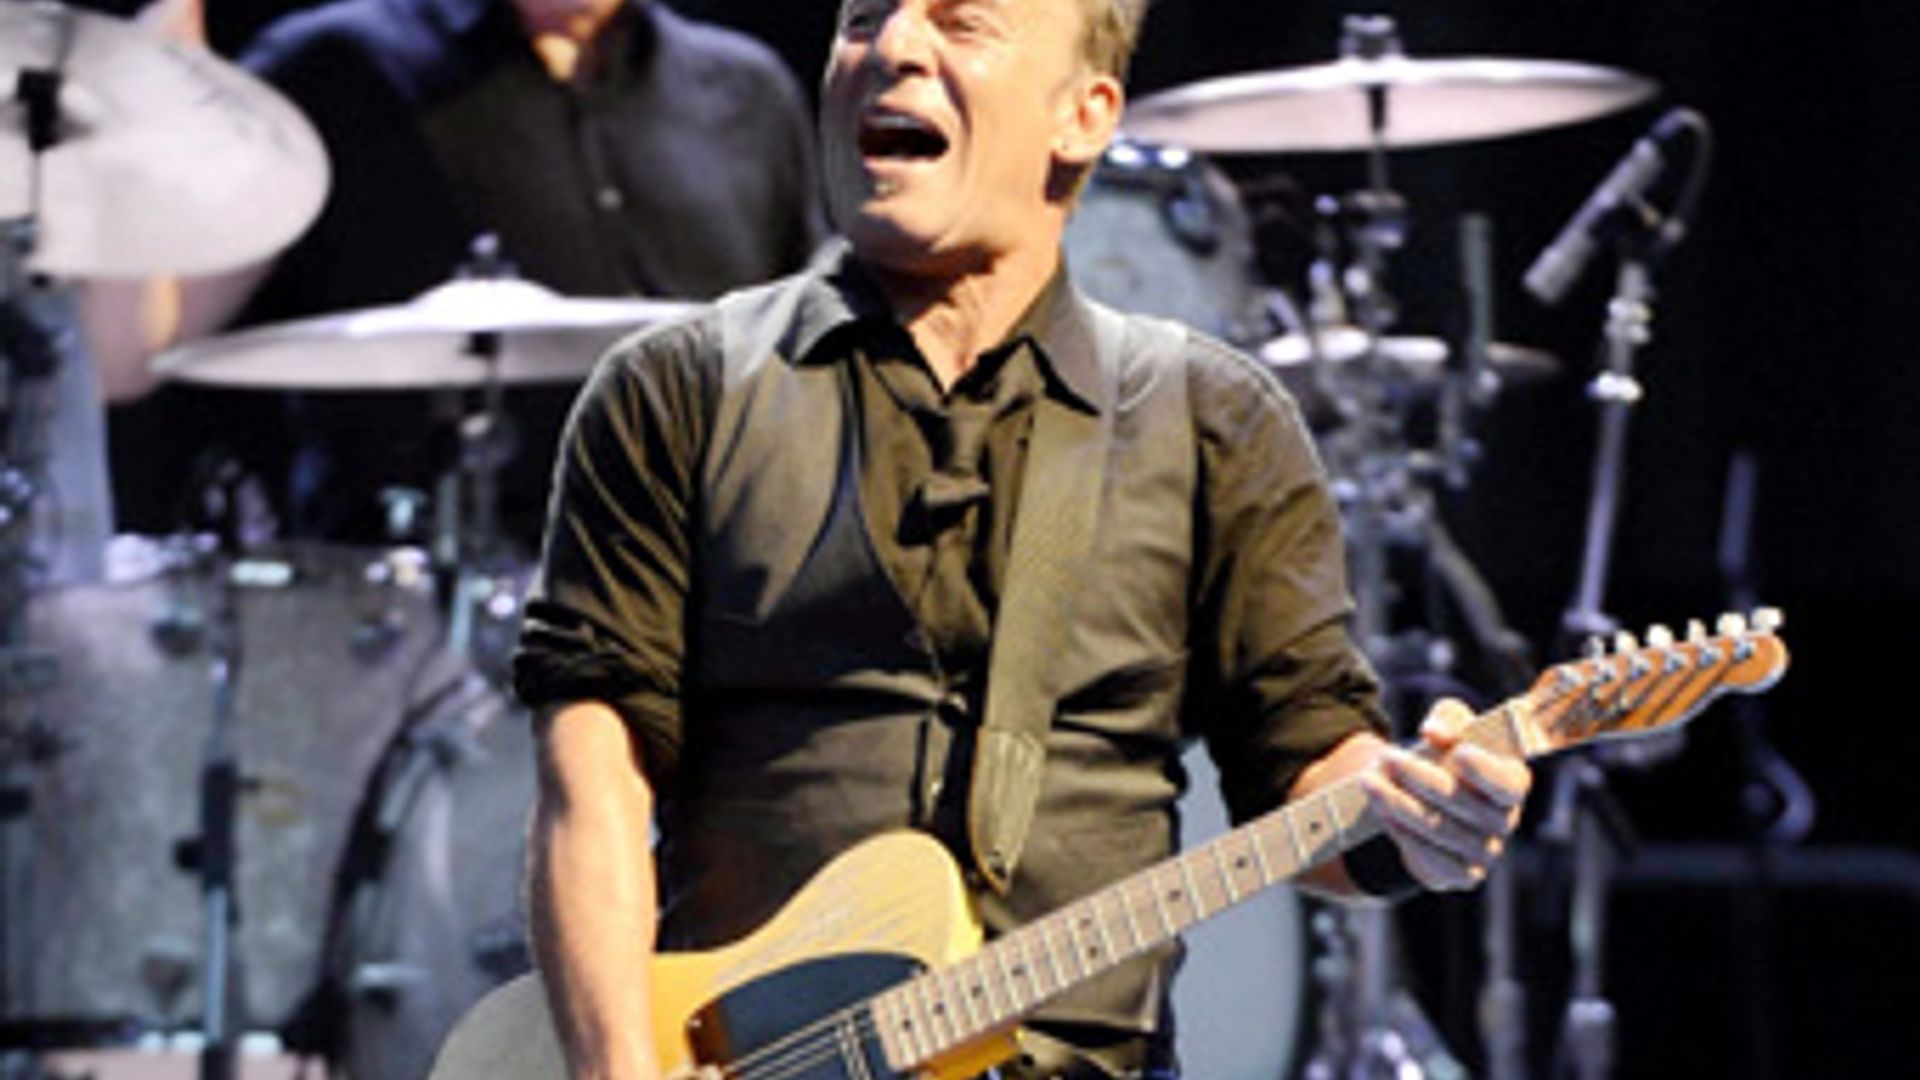 Bruce Springsteen, 73, left heartbroken as he's forced to cancel tour due to health reasons